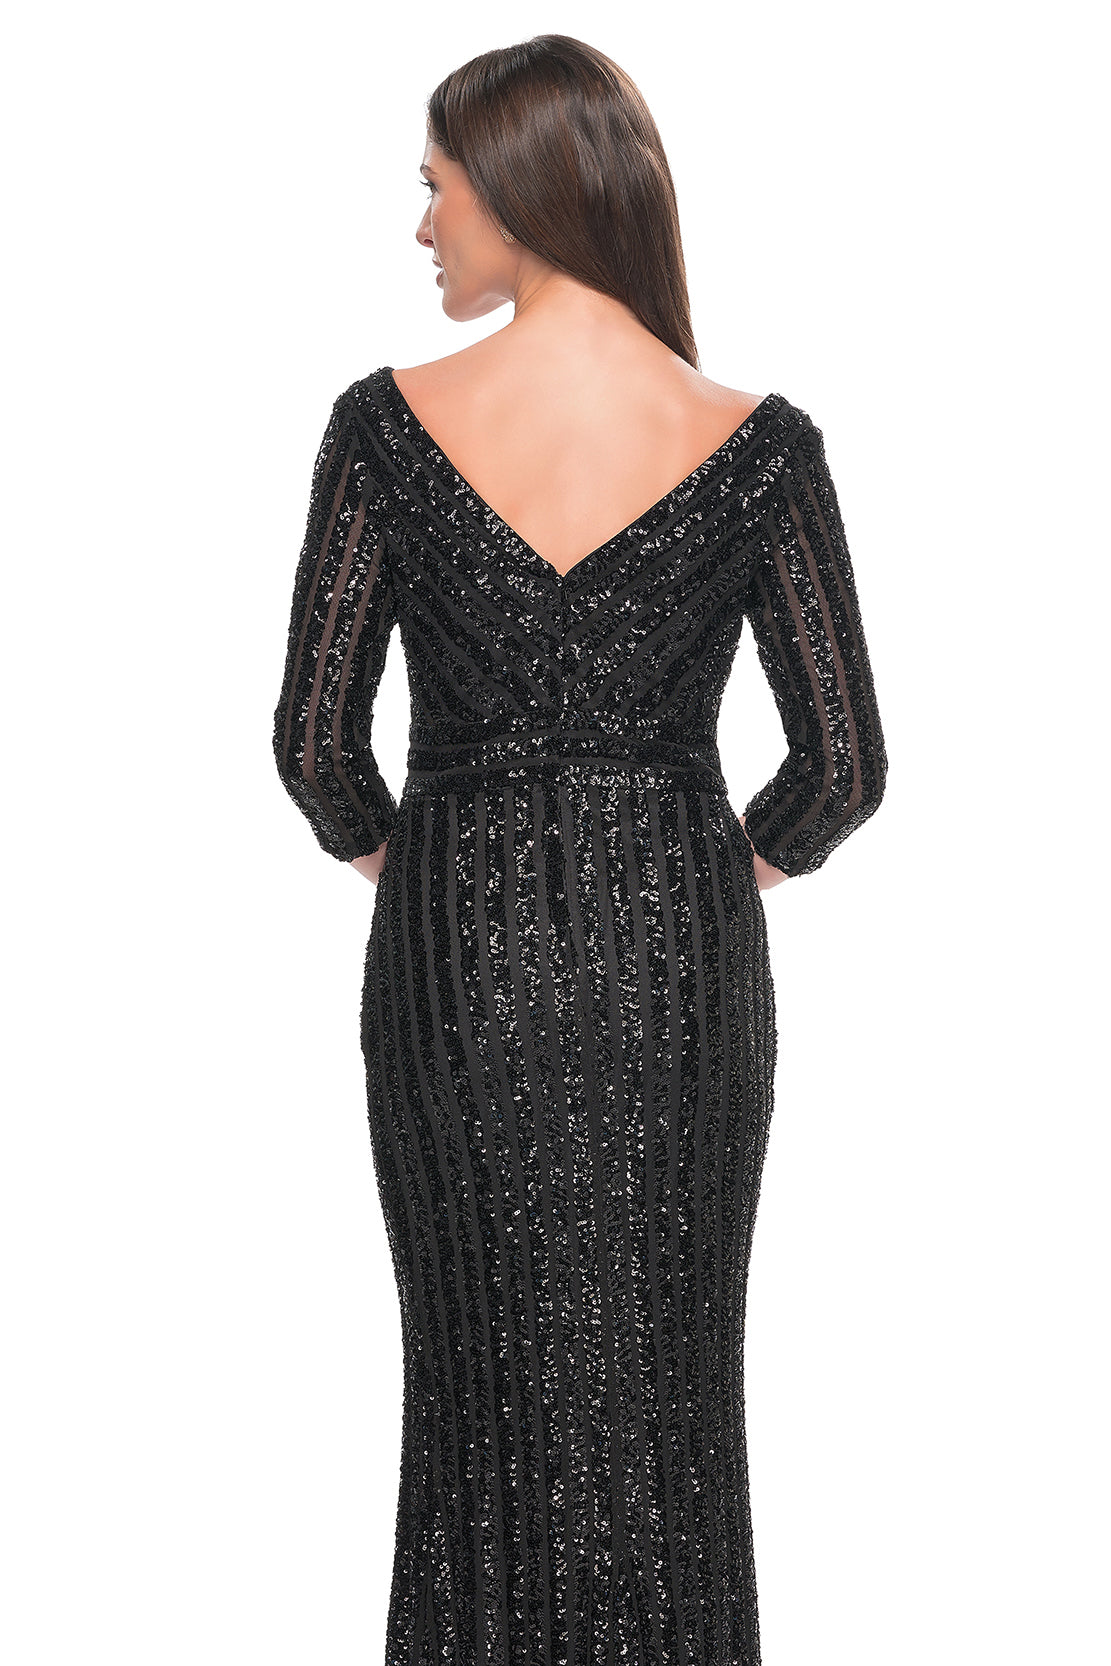 La Femme 31681 Elegant Sequin V-Neck Mother of the Bride/Groom Gown - A vision of elegance with a unique sequin pattern featuring thick lines, V neckline, and three-quarter sleeves for a classic and refined appearance.  The model is wearing the dress in the color black.